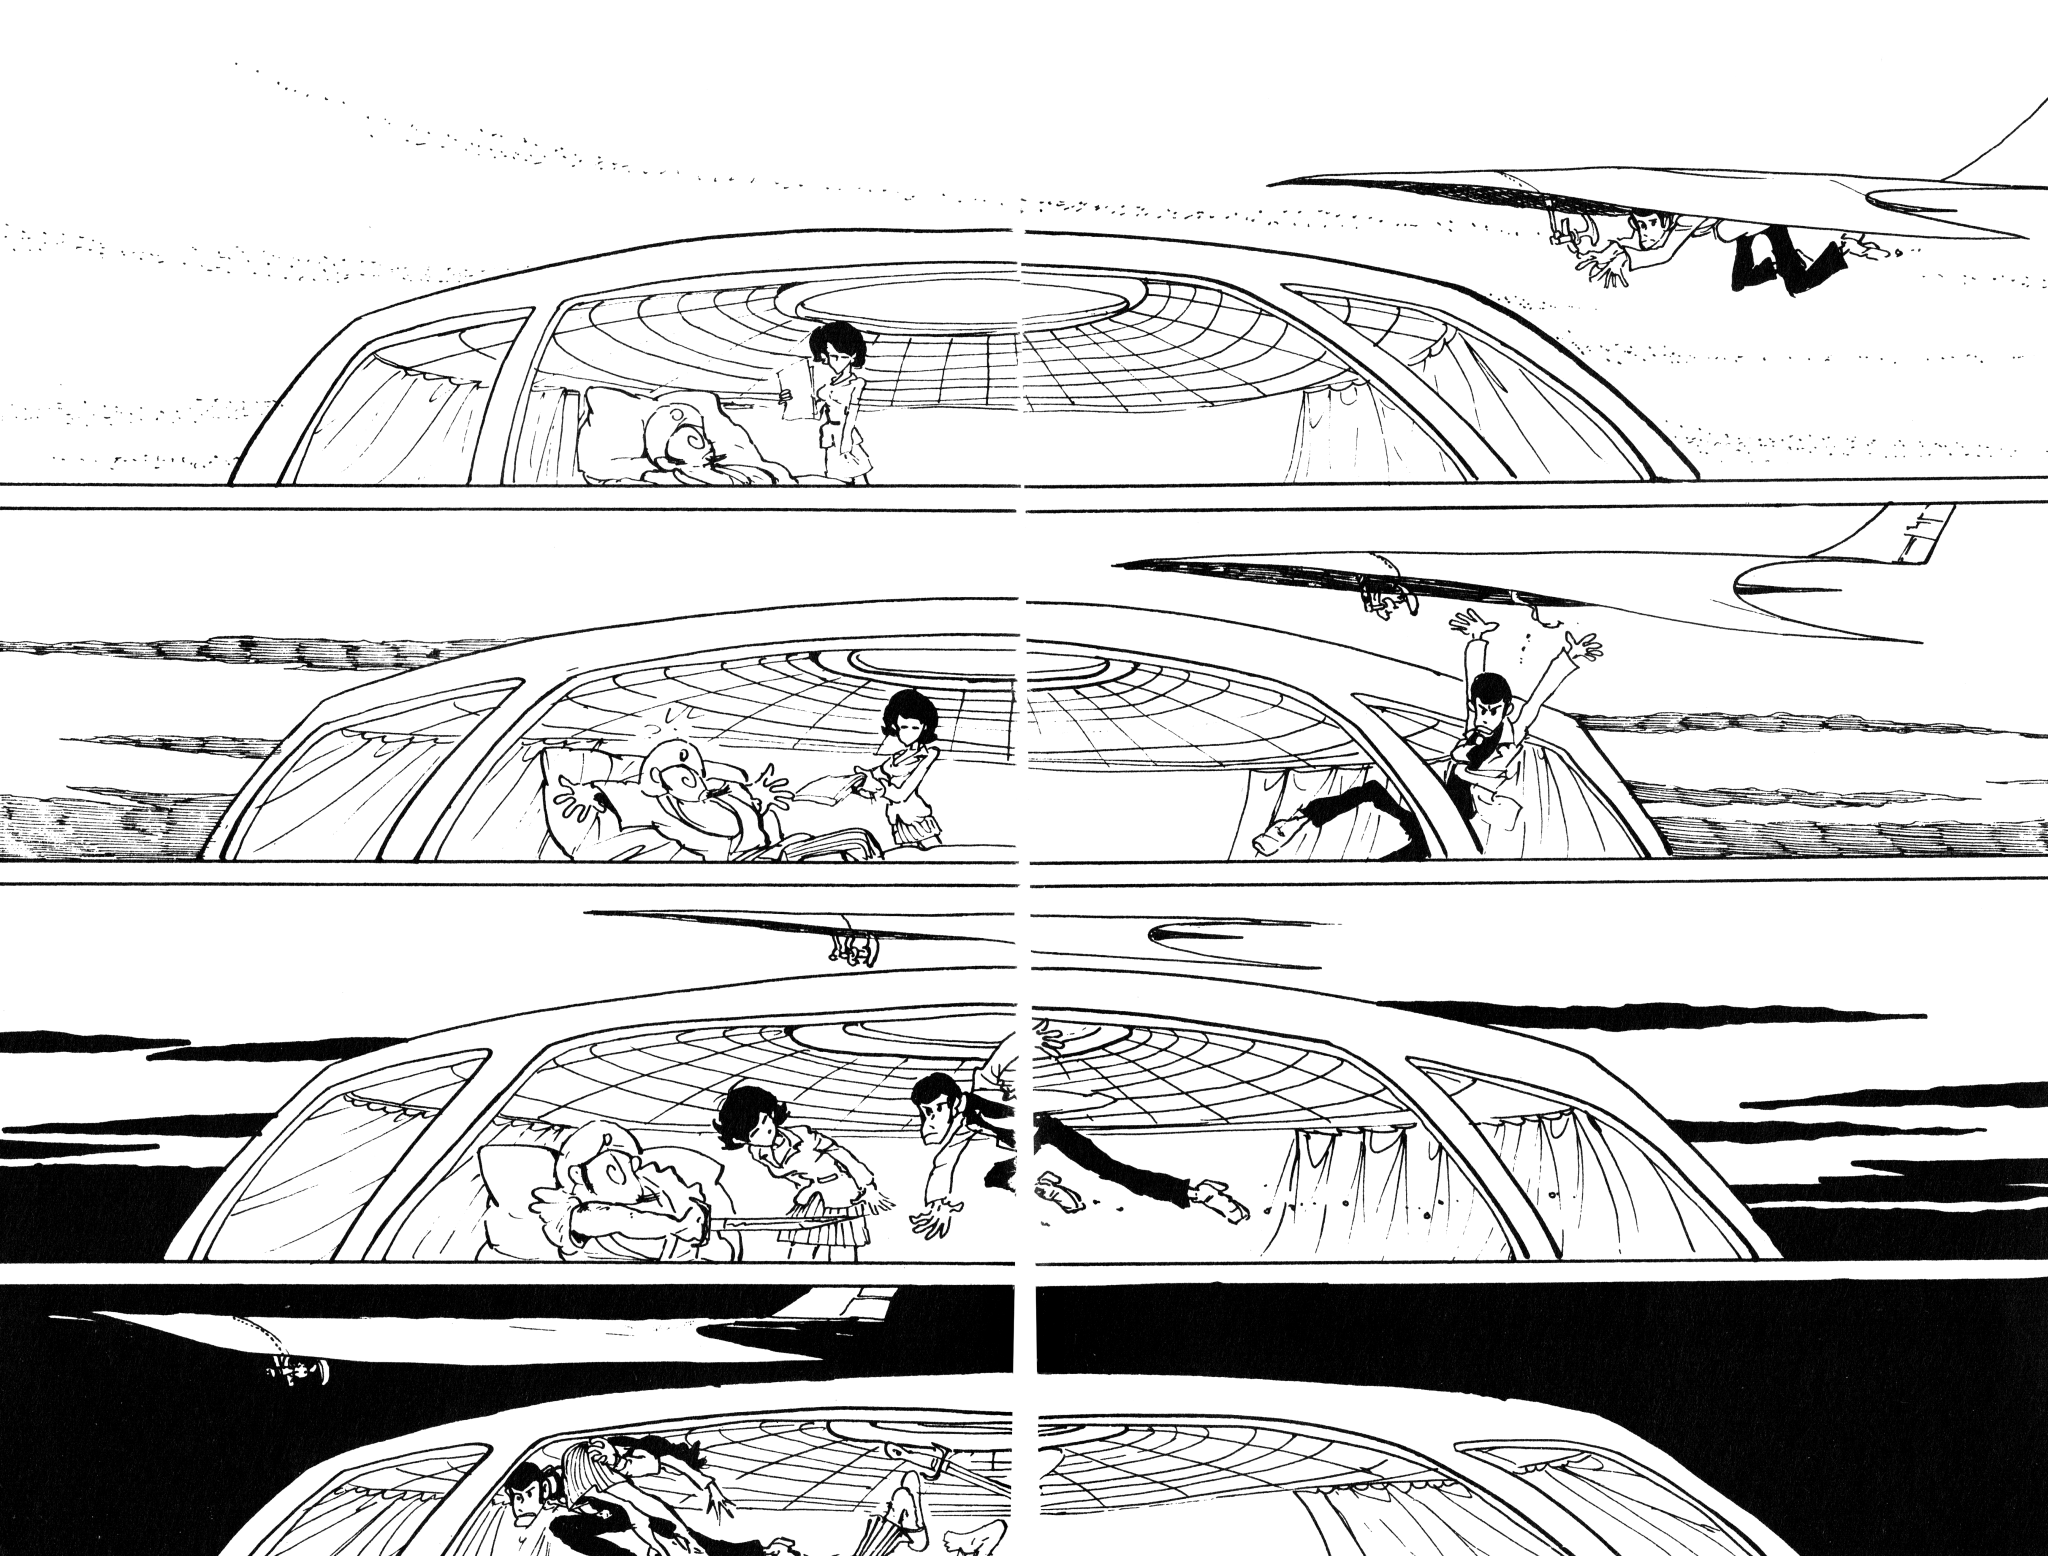 Lupin Iii: World’S Most Wanted Vol.5 Chapter 37